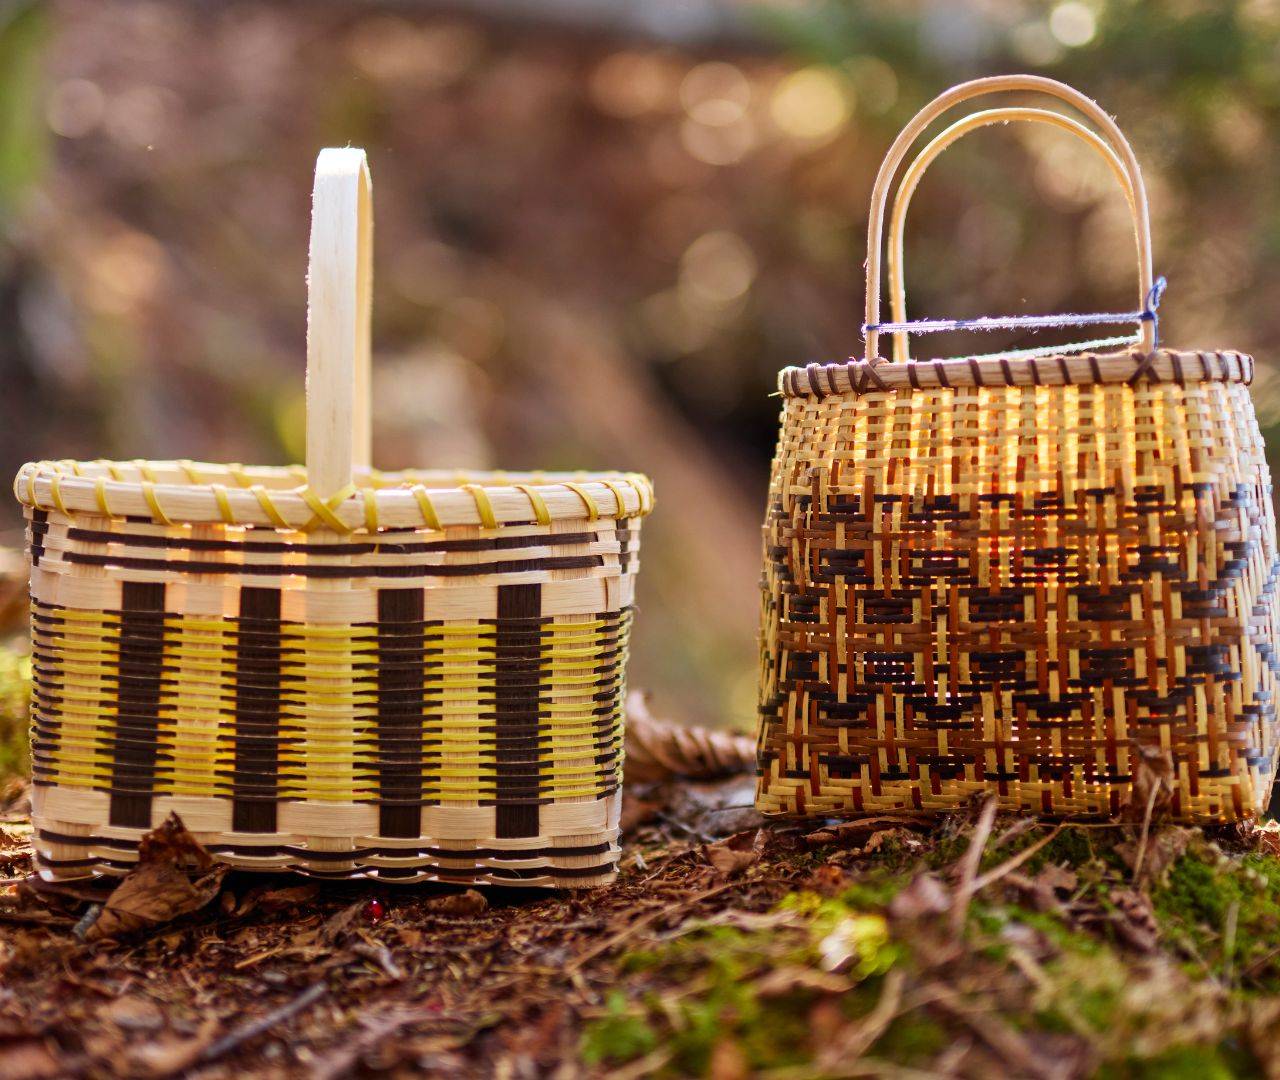 Two handwoven Cherokee baskets on a forest floor, one upright and one tipped over, surrounded by fallen leaves and bathed in soft sunlight.